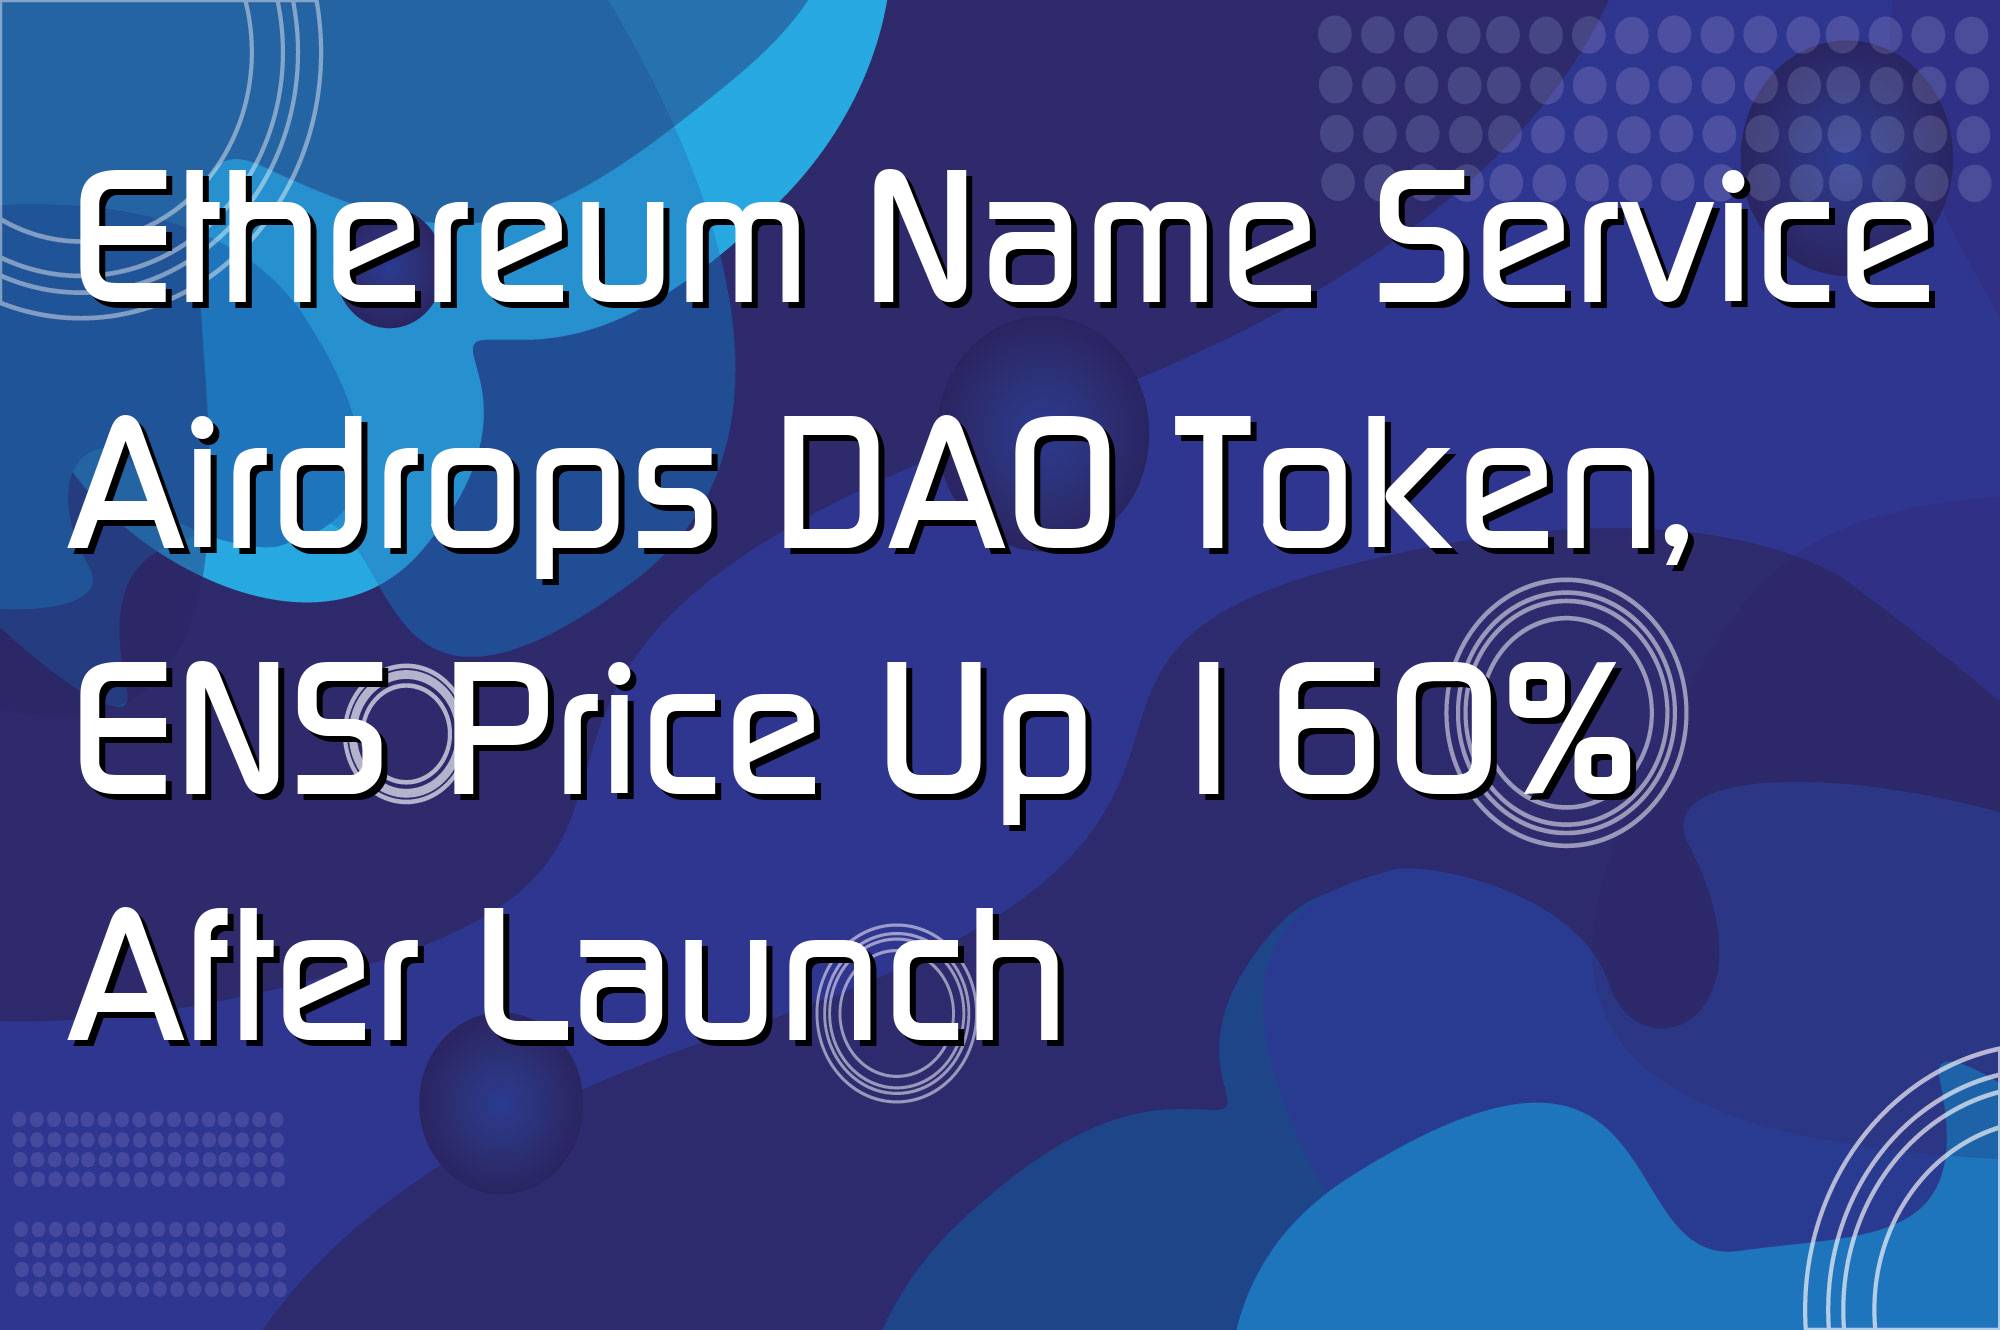 @$67259: Ethereum Name Service Airdrops DAO Token, ENS Price Up 160% After Launch